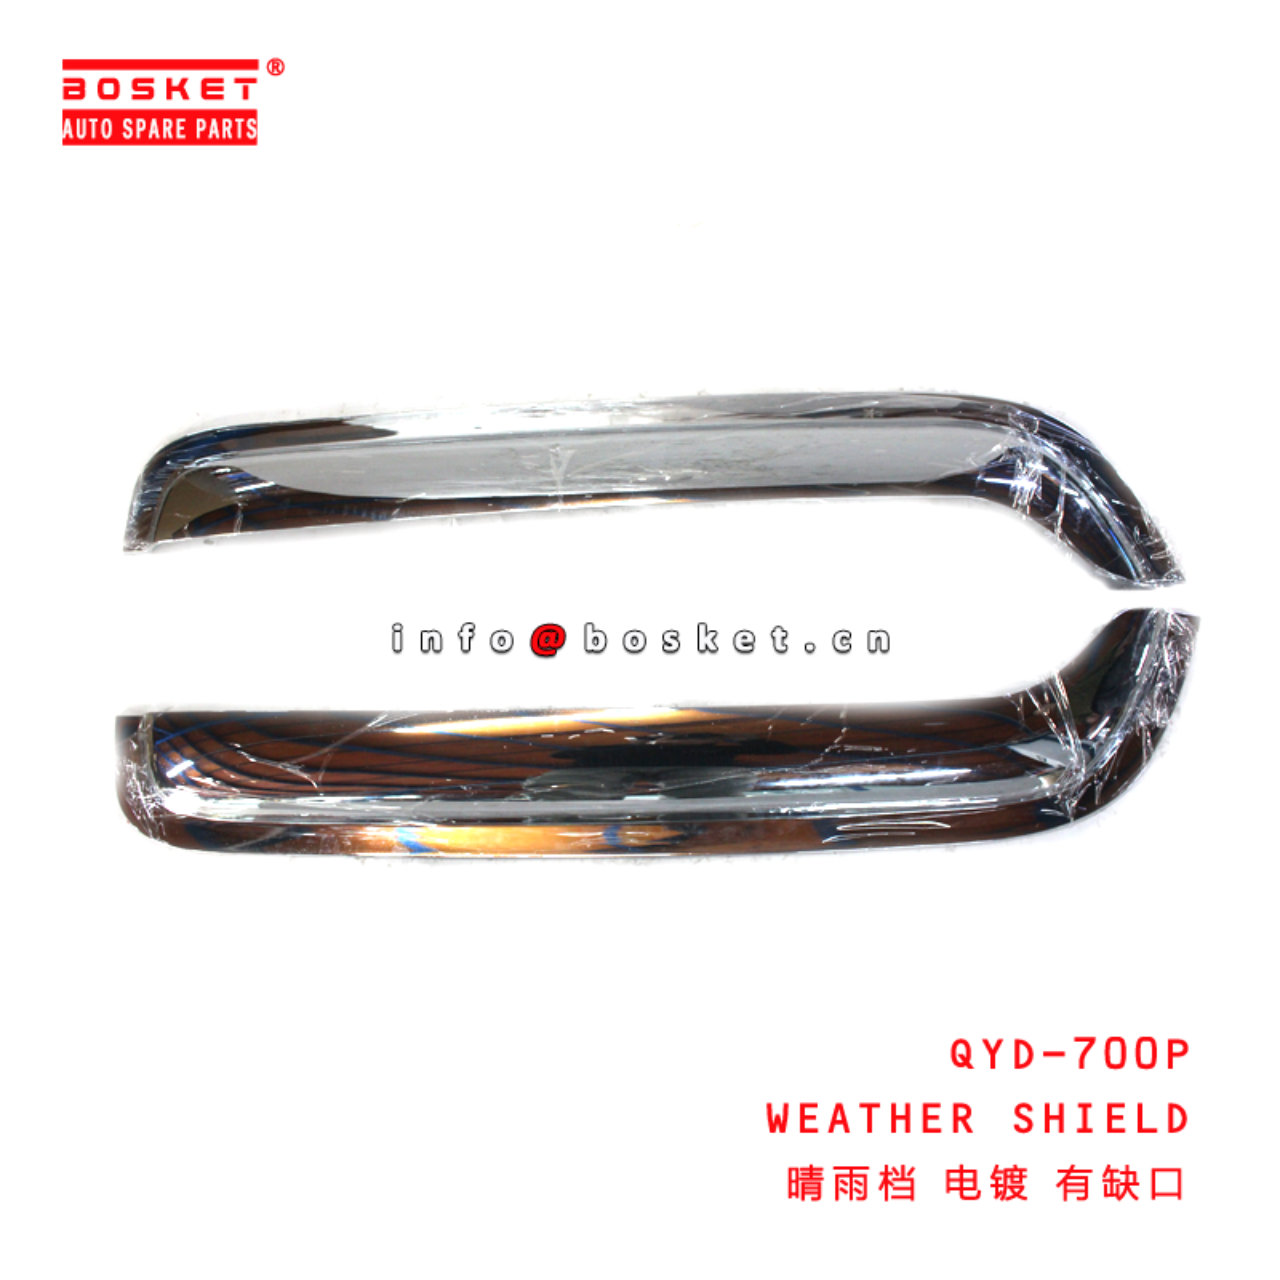 QYD-700P WEATHER SHIELD suitable for ISUZU 700P  QYD-700P